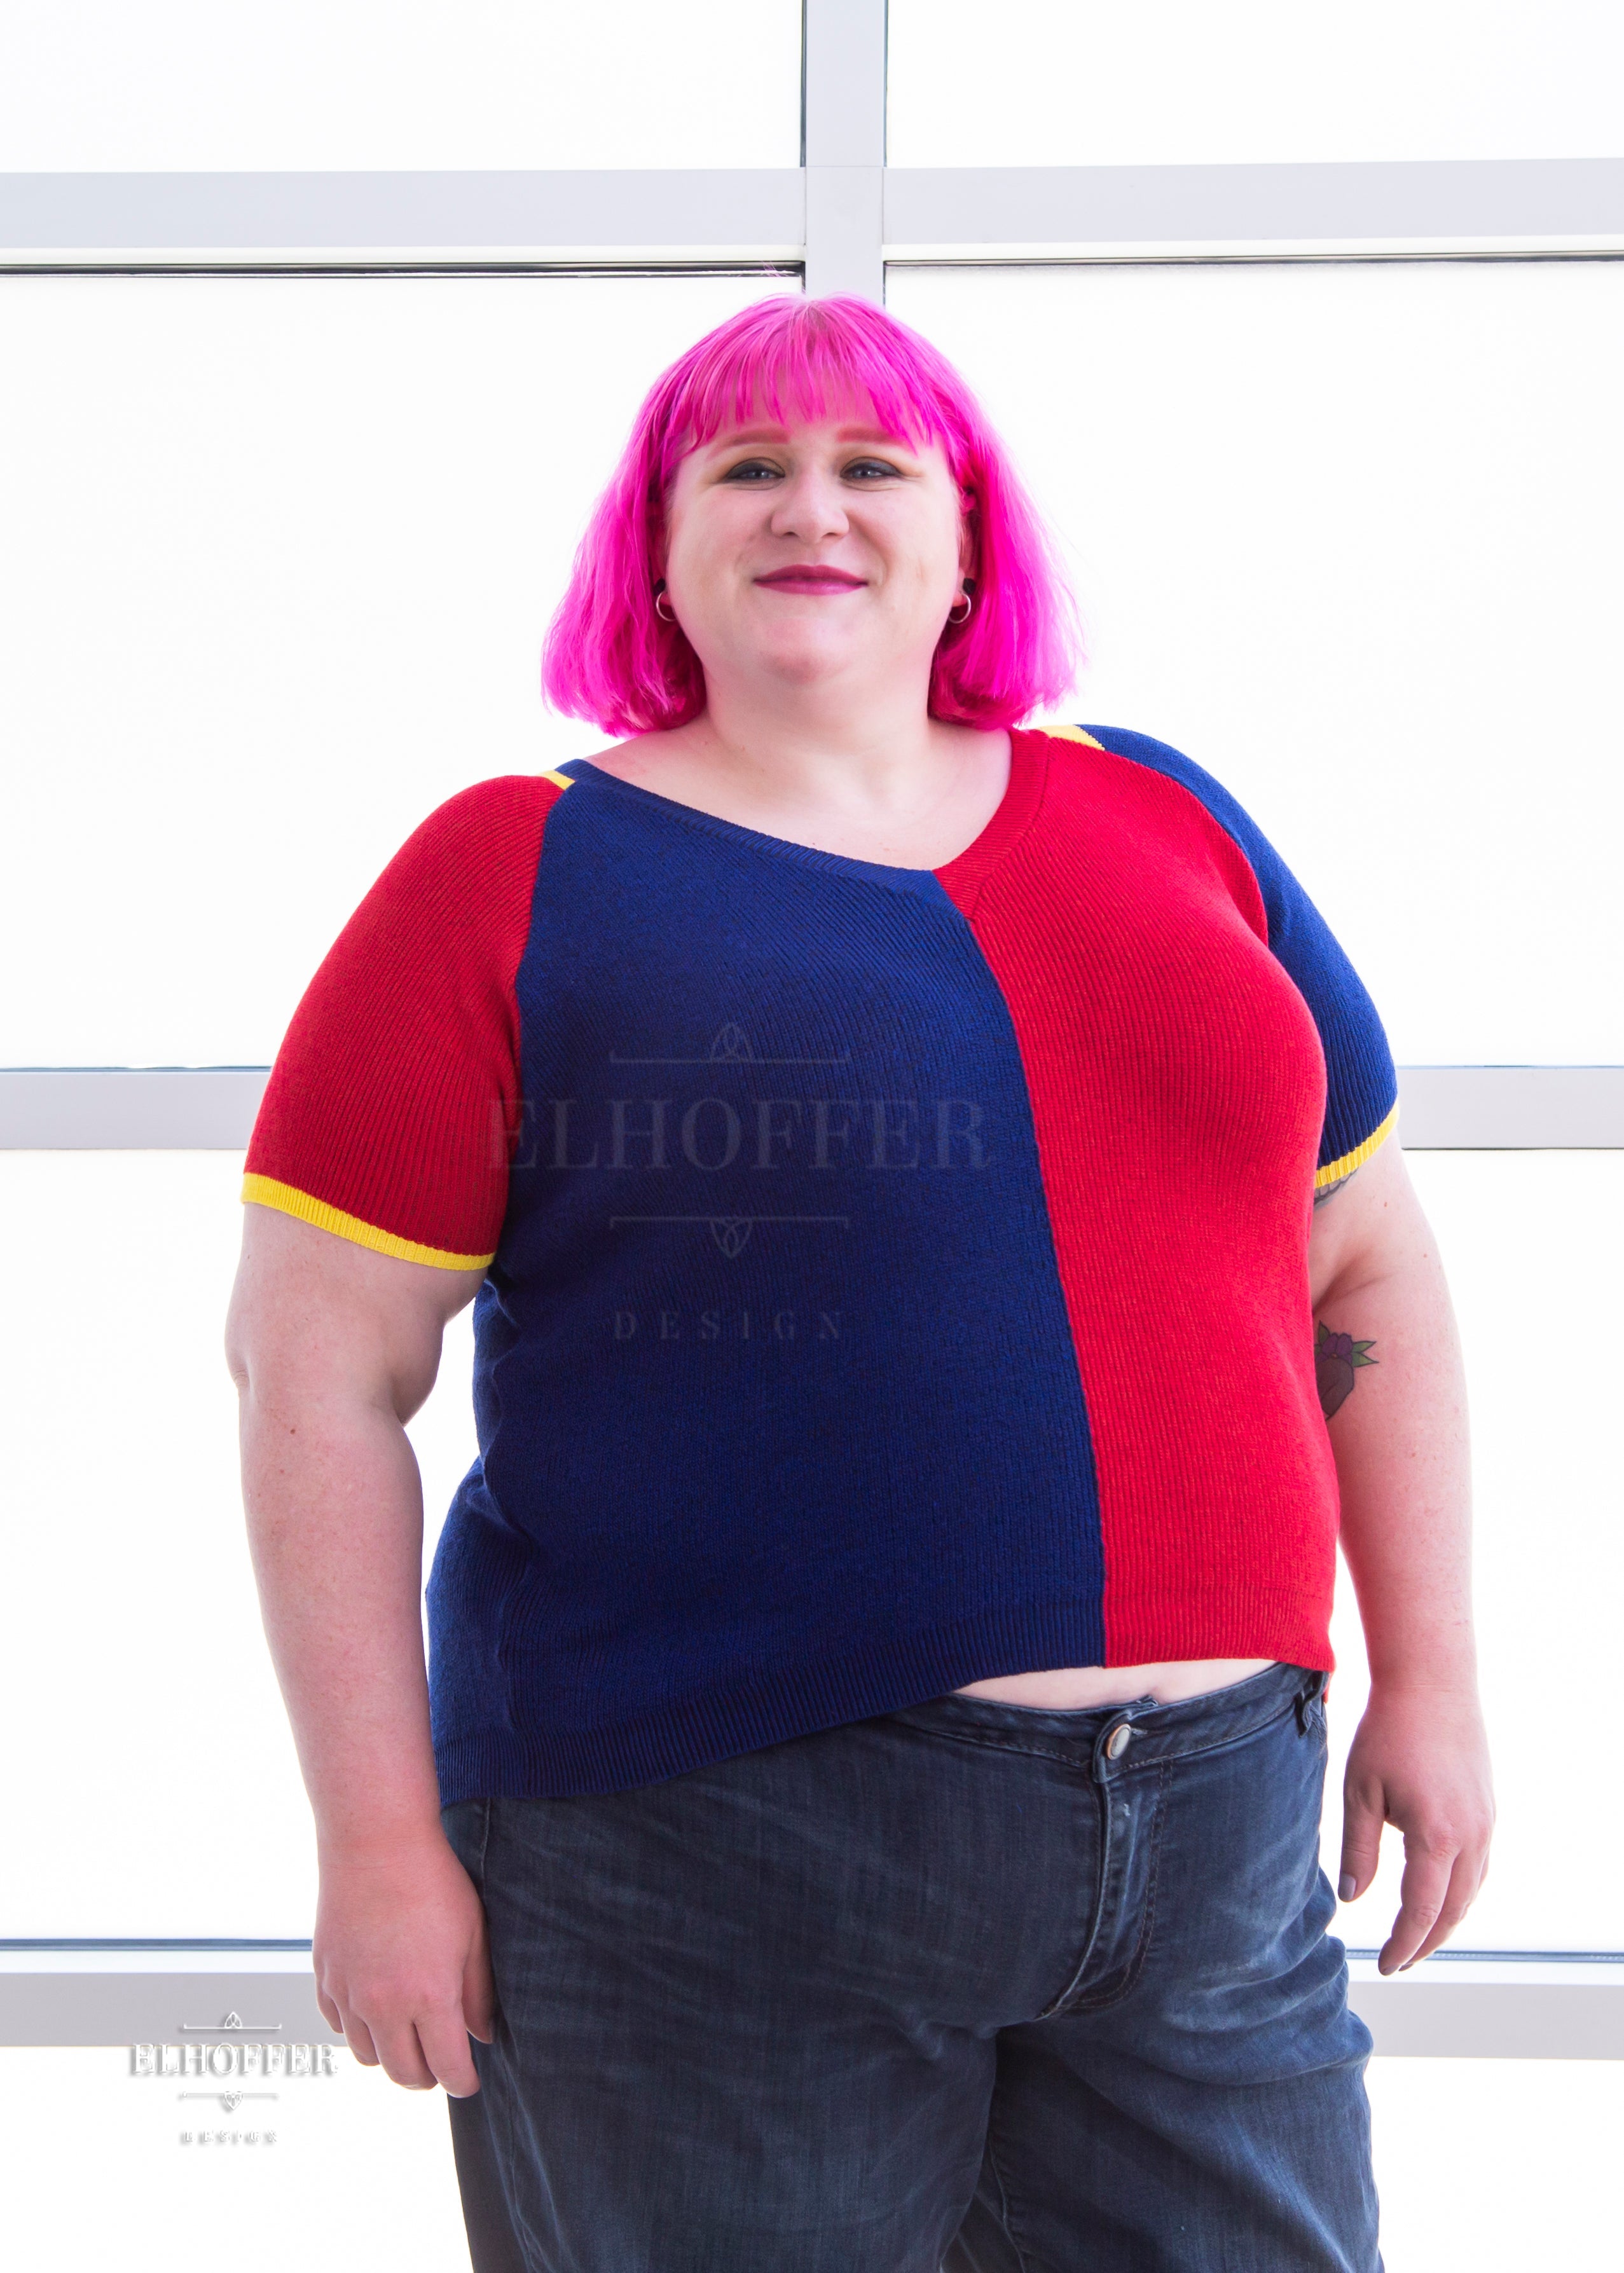 Logan, a fair skinned 3xl model with short pink hair with bangs, is wearing a short sleeve knit top with alternating blue and red colors. There is yellow detailing along the top of the shoulder and around the cuff of the sleeve.